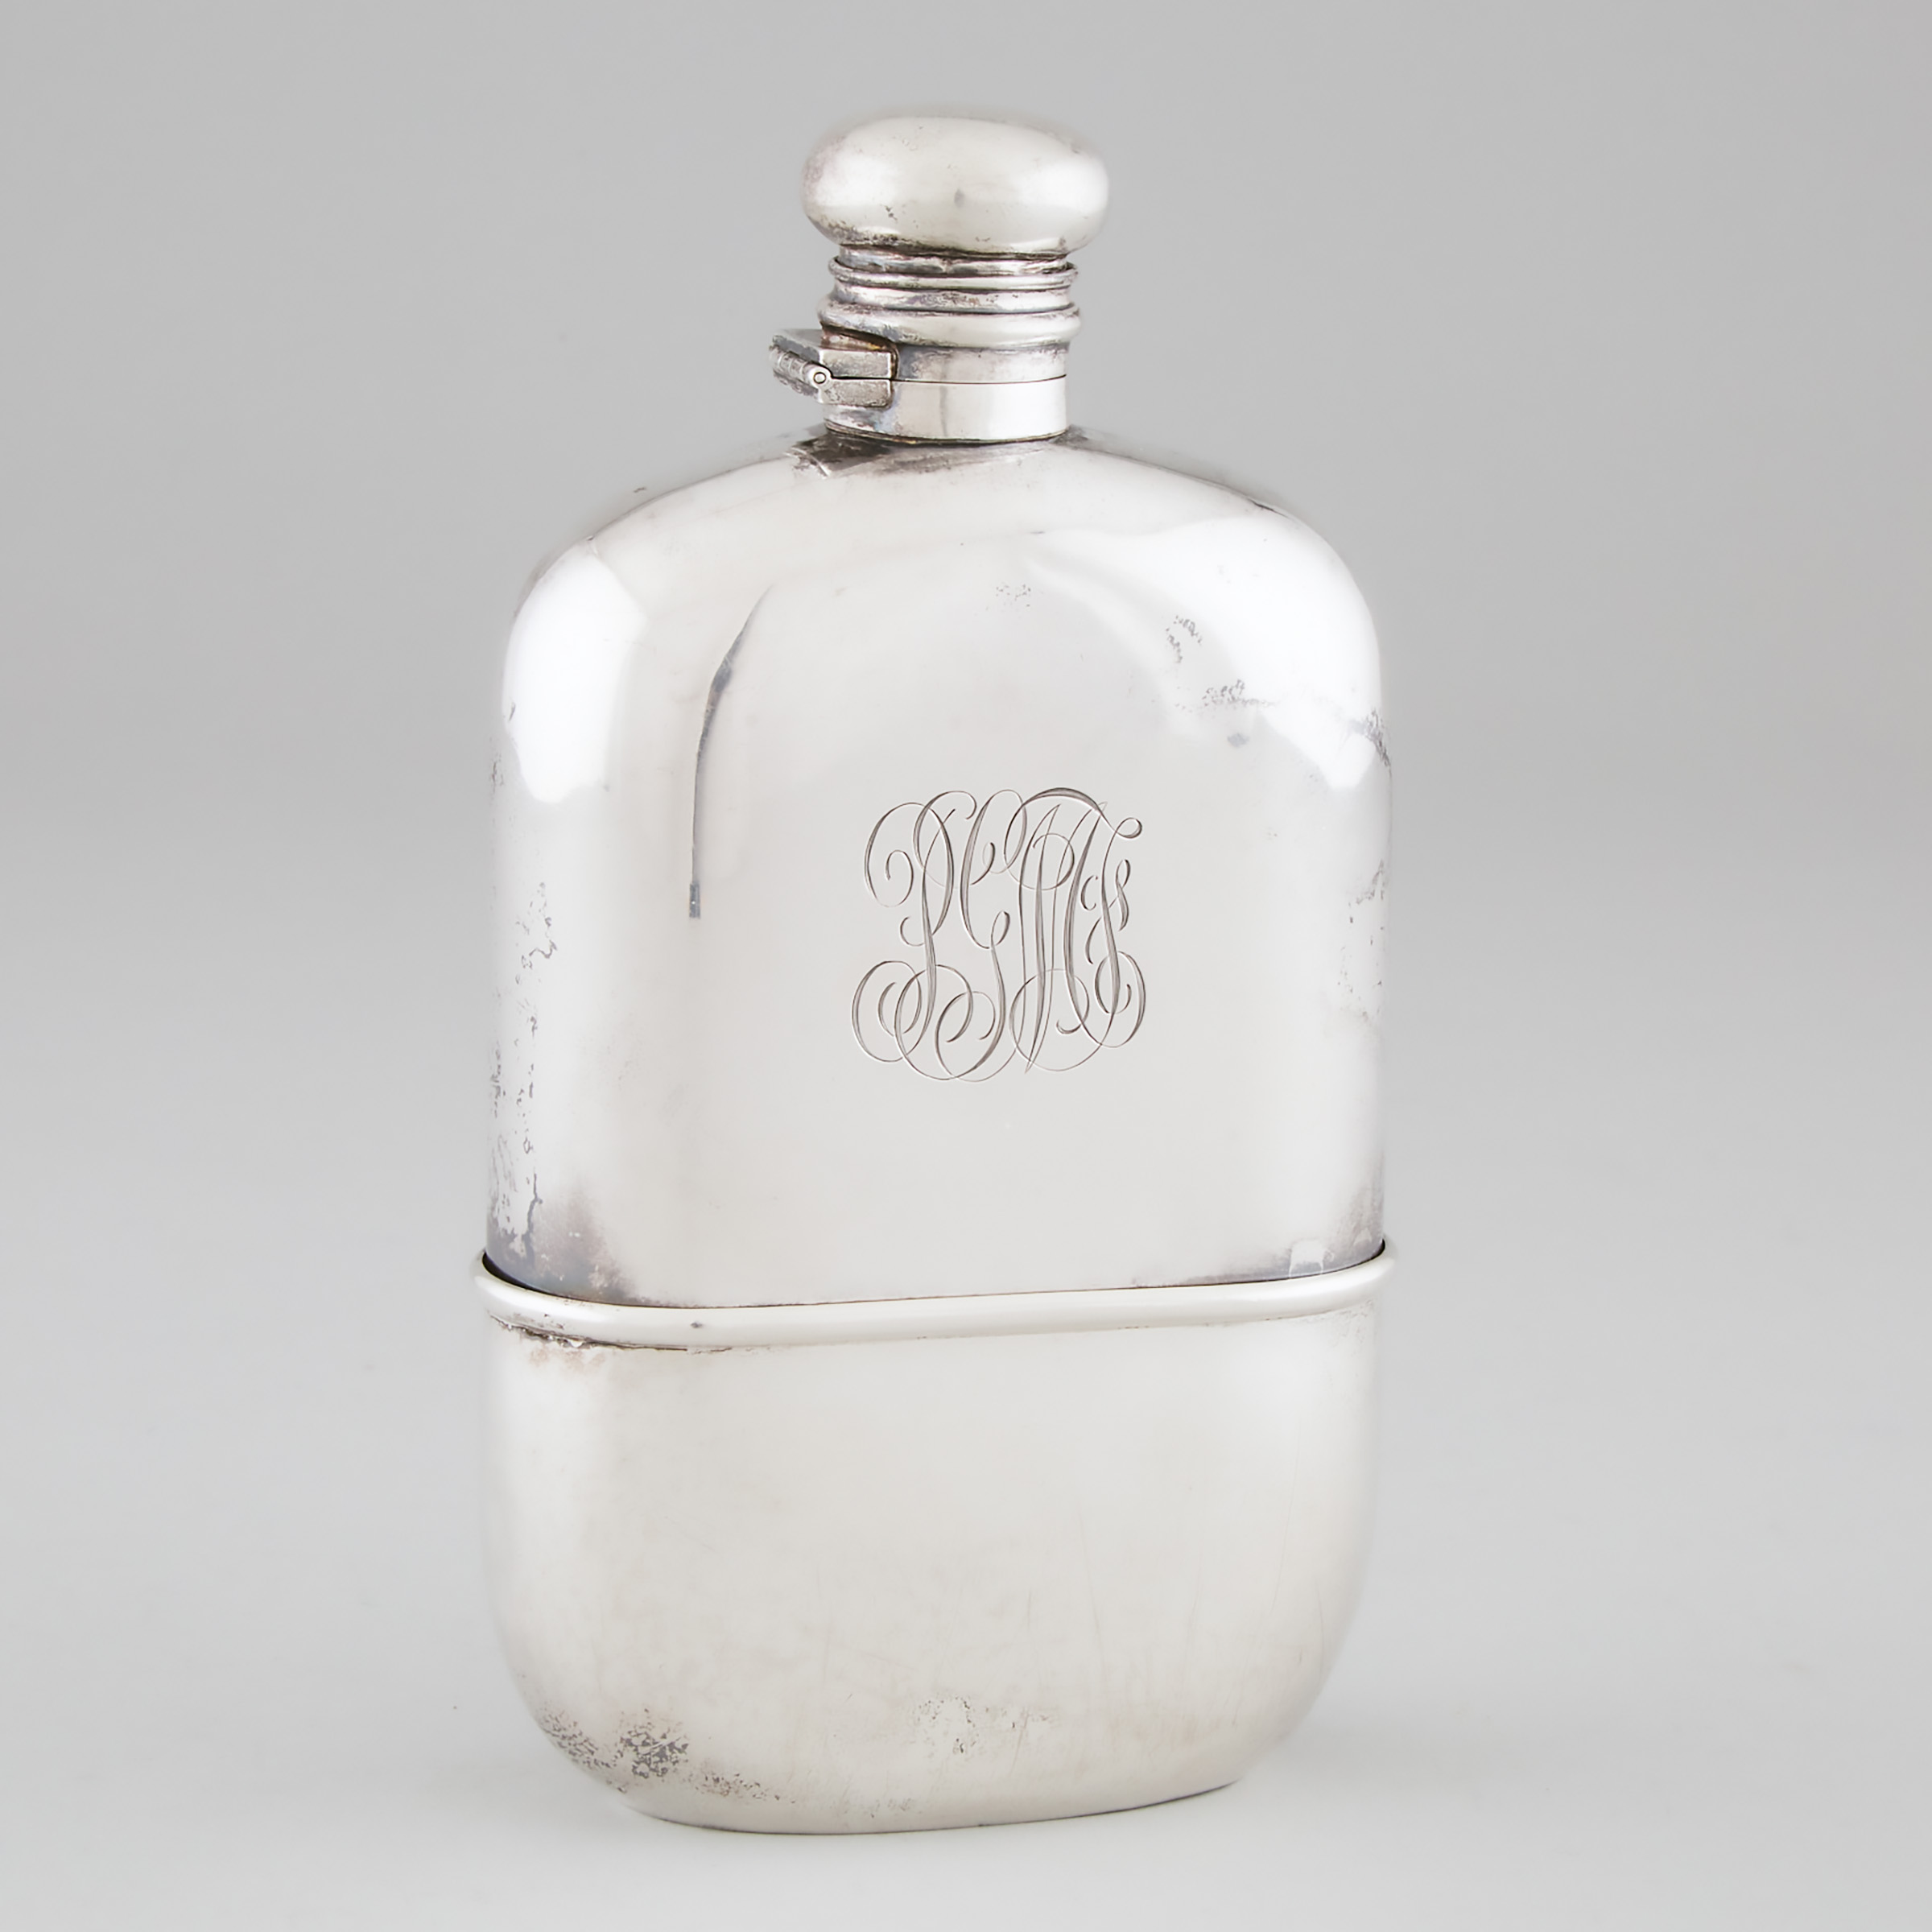 American Silver and Glass Spirit Flask, J.E. Caldwell & Co, Philadelphia, Pa., early 20th century